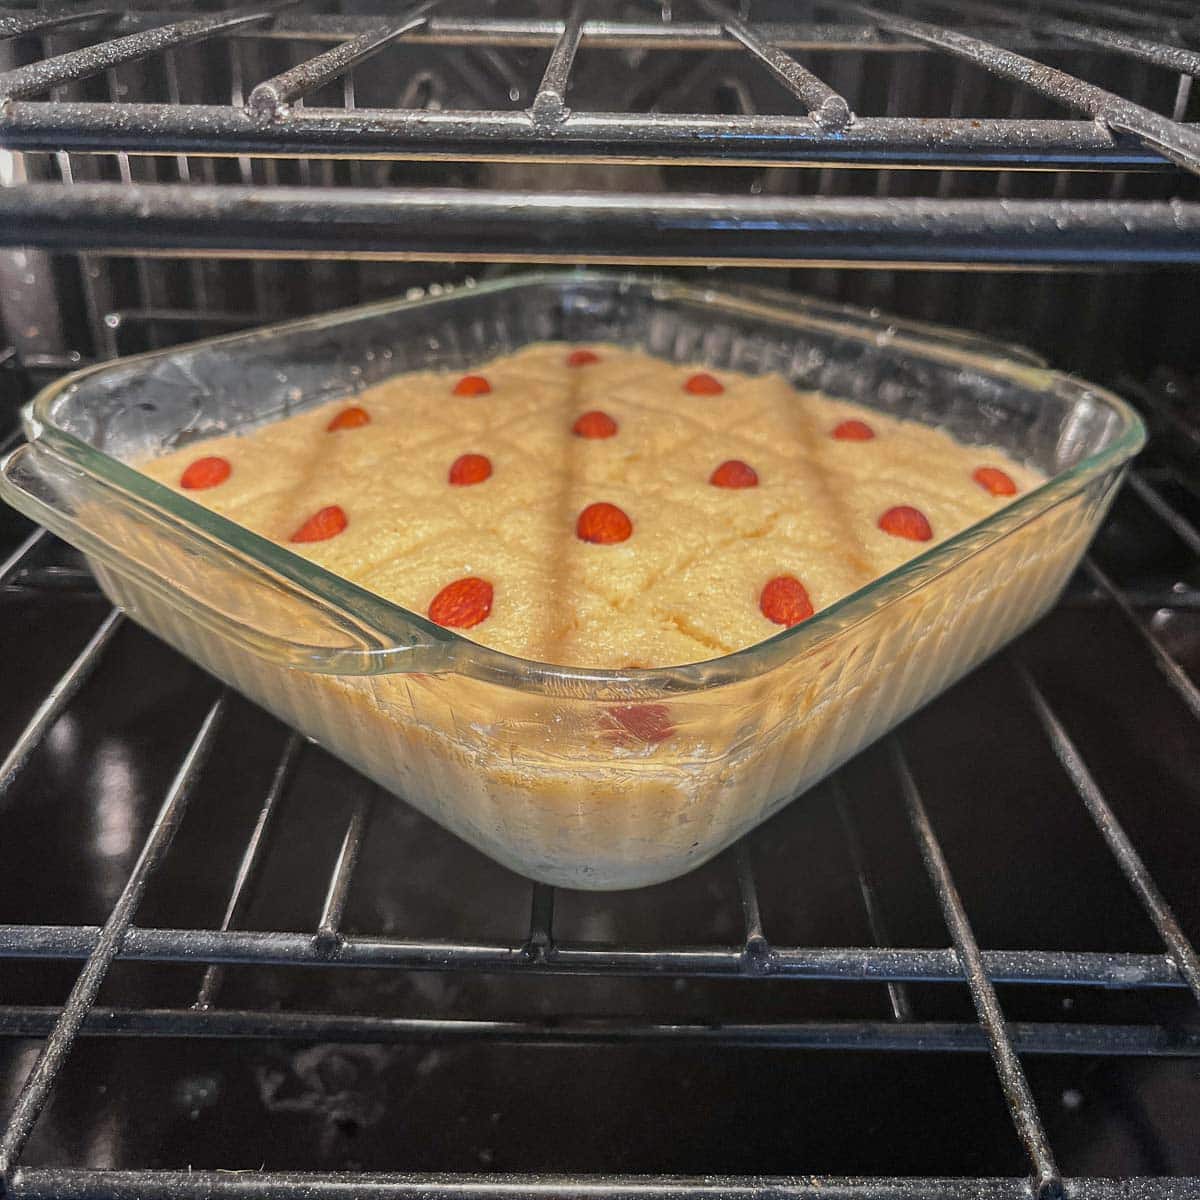 semolina cake / namourra being baked in the oven